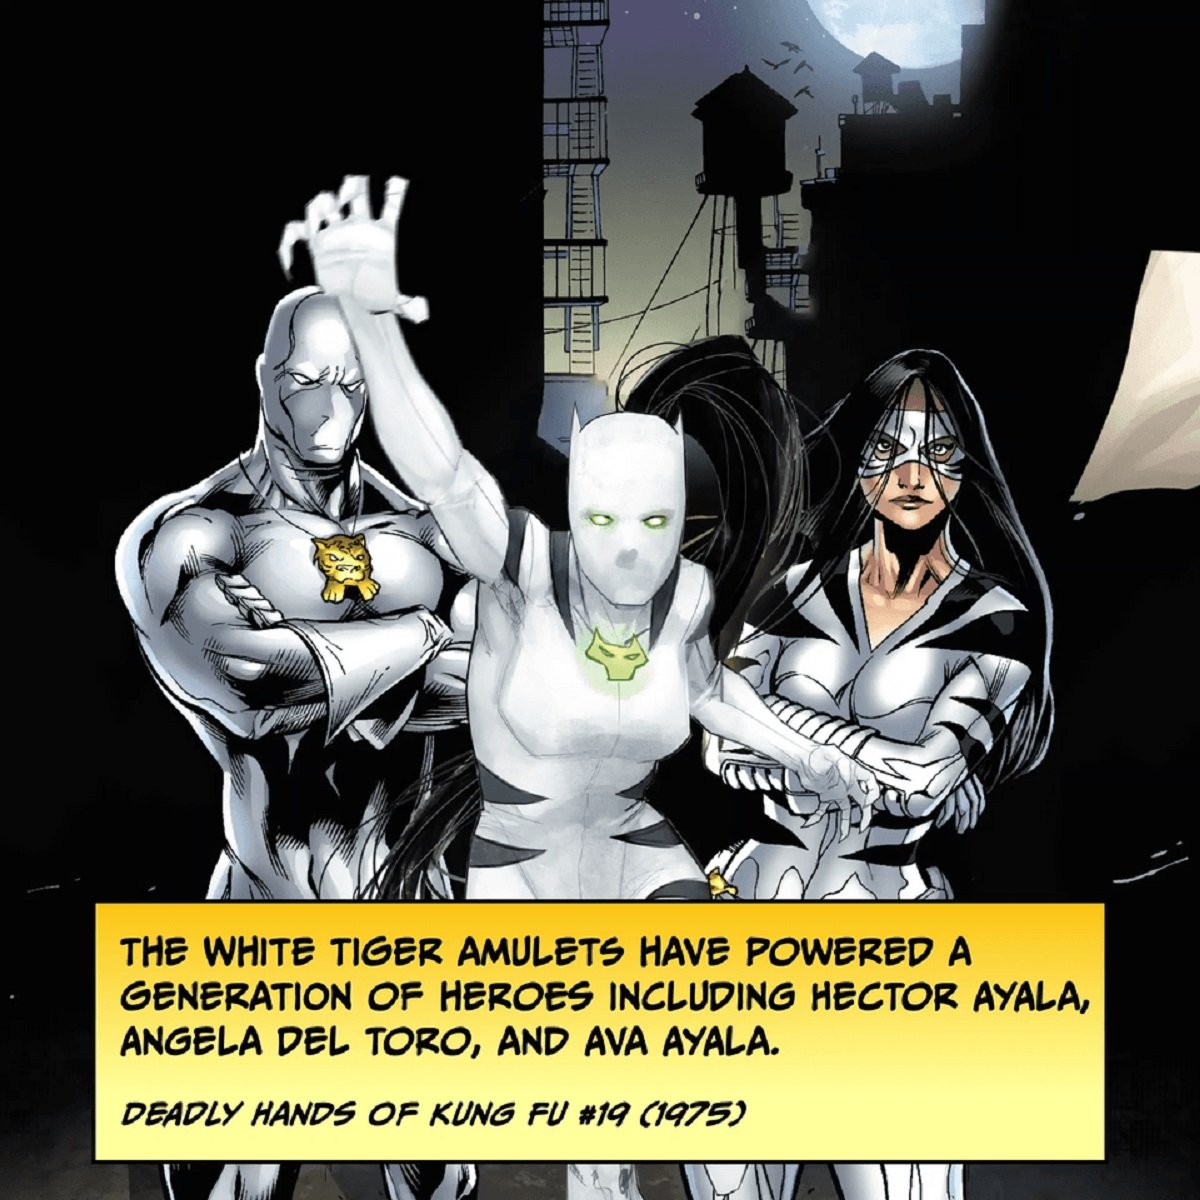 Color illustration of three generations of the White Tiger character from Marvel Comics. On the far left is the Hector Ayala original from 1975 in a white suit that covers his whole body and face, a gold tiger amulet around his neck. In the middle is Angela Del Toro, in a more feminine suit that covers her whole body and face and has black markings along her sides and on her shoulders. She has a glowing green tiger amulet around her neck. On the right is Ava Ayala who wears a black and white suit that comes up to her neck with a white mask around her eyes, and her long, black hair loose. The text below them reads: "the White Tiger amulets have powered a generation of heroes including Hector Ayala, Angela Del Toro, and Ava Ayala. 'Deadly Hands of Kung Fu #19 (1975)"